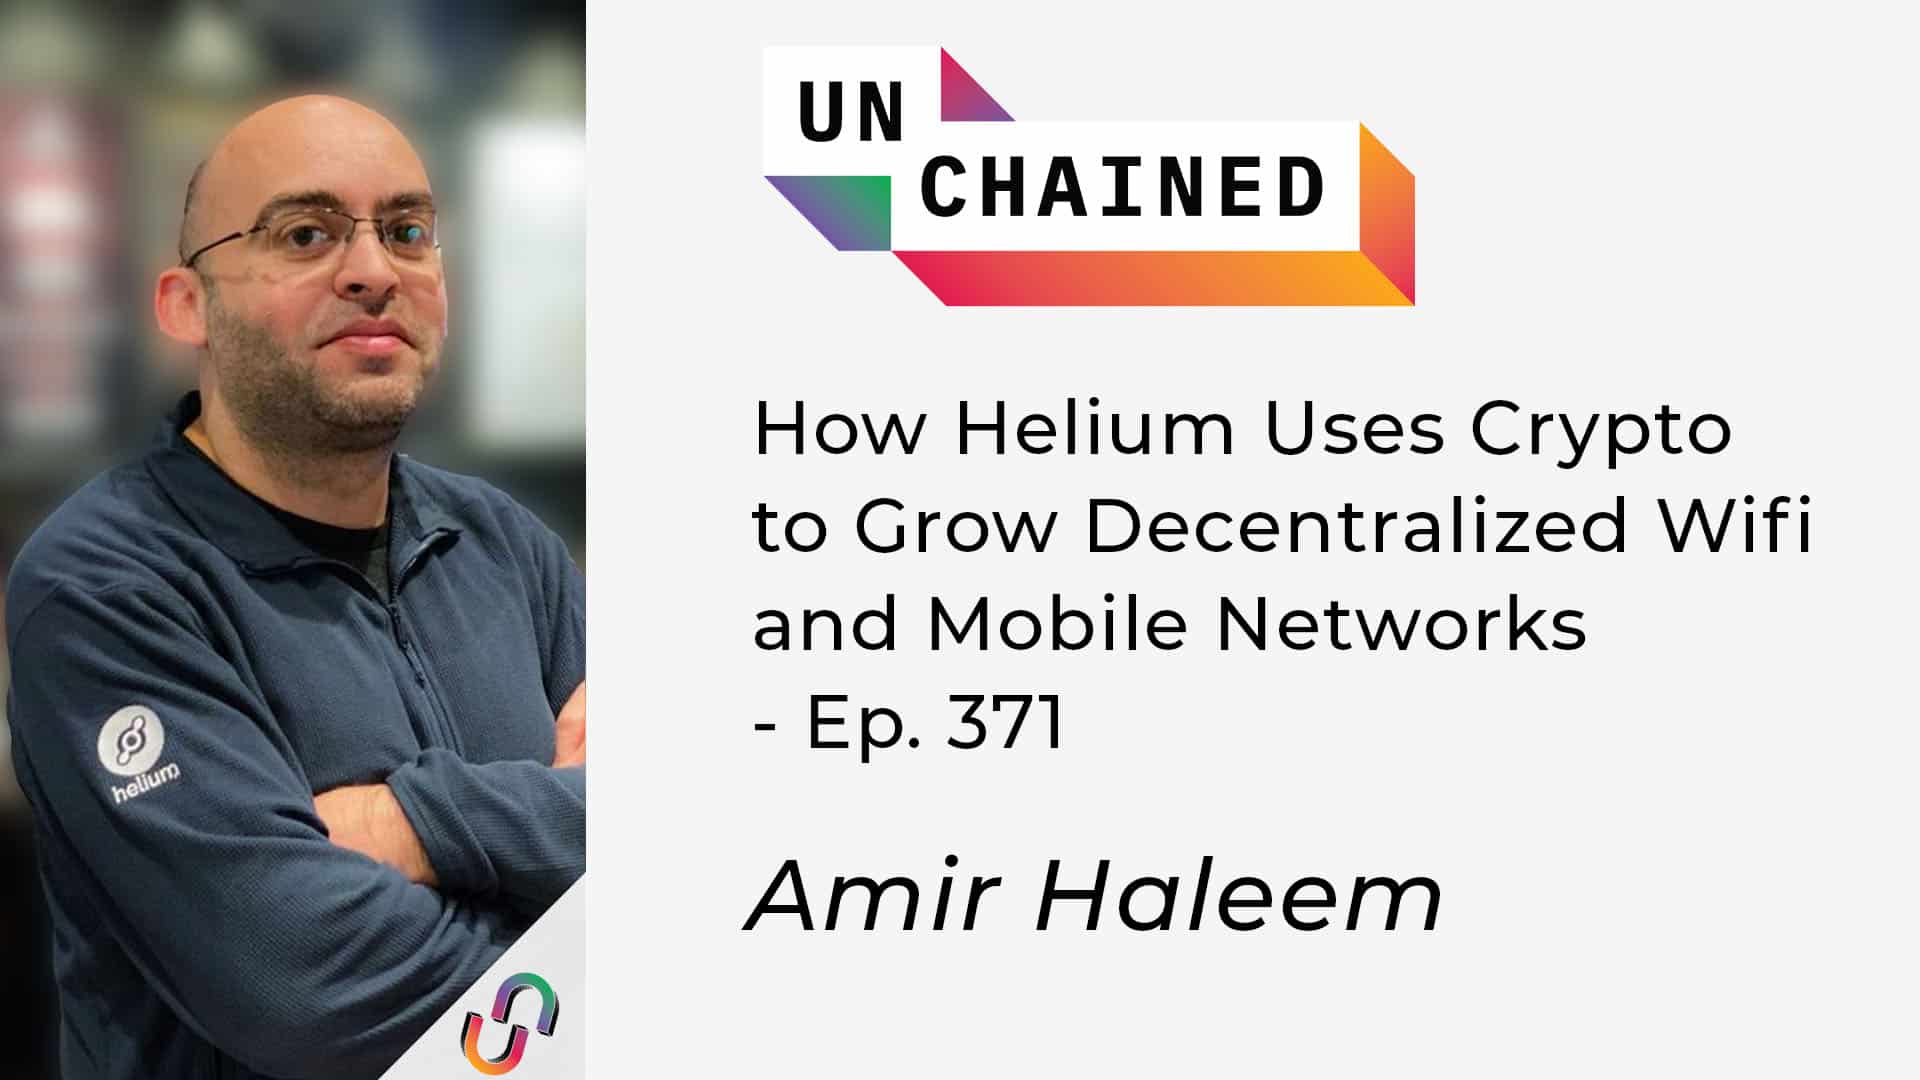 How Helium Uses Crypto to Grow Decentralized Wifi and Mobile Networks - Ep. 371